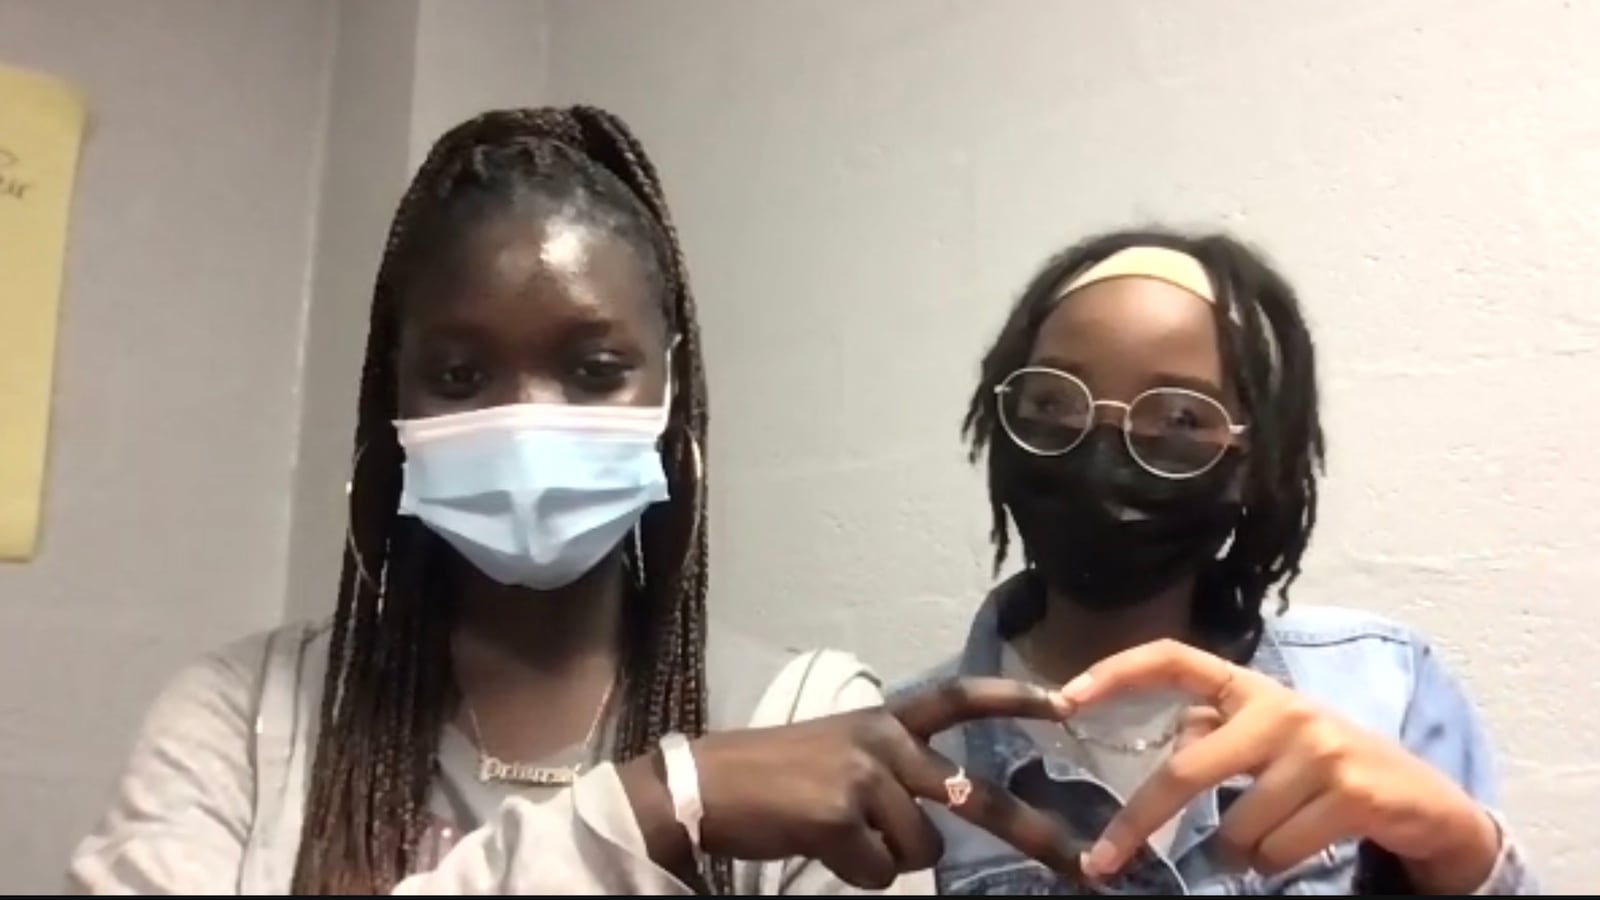 Two students wearing face masks make a heart sign with their hands.